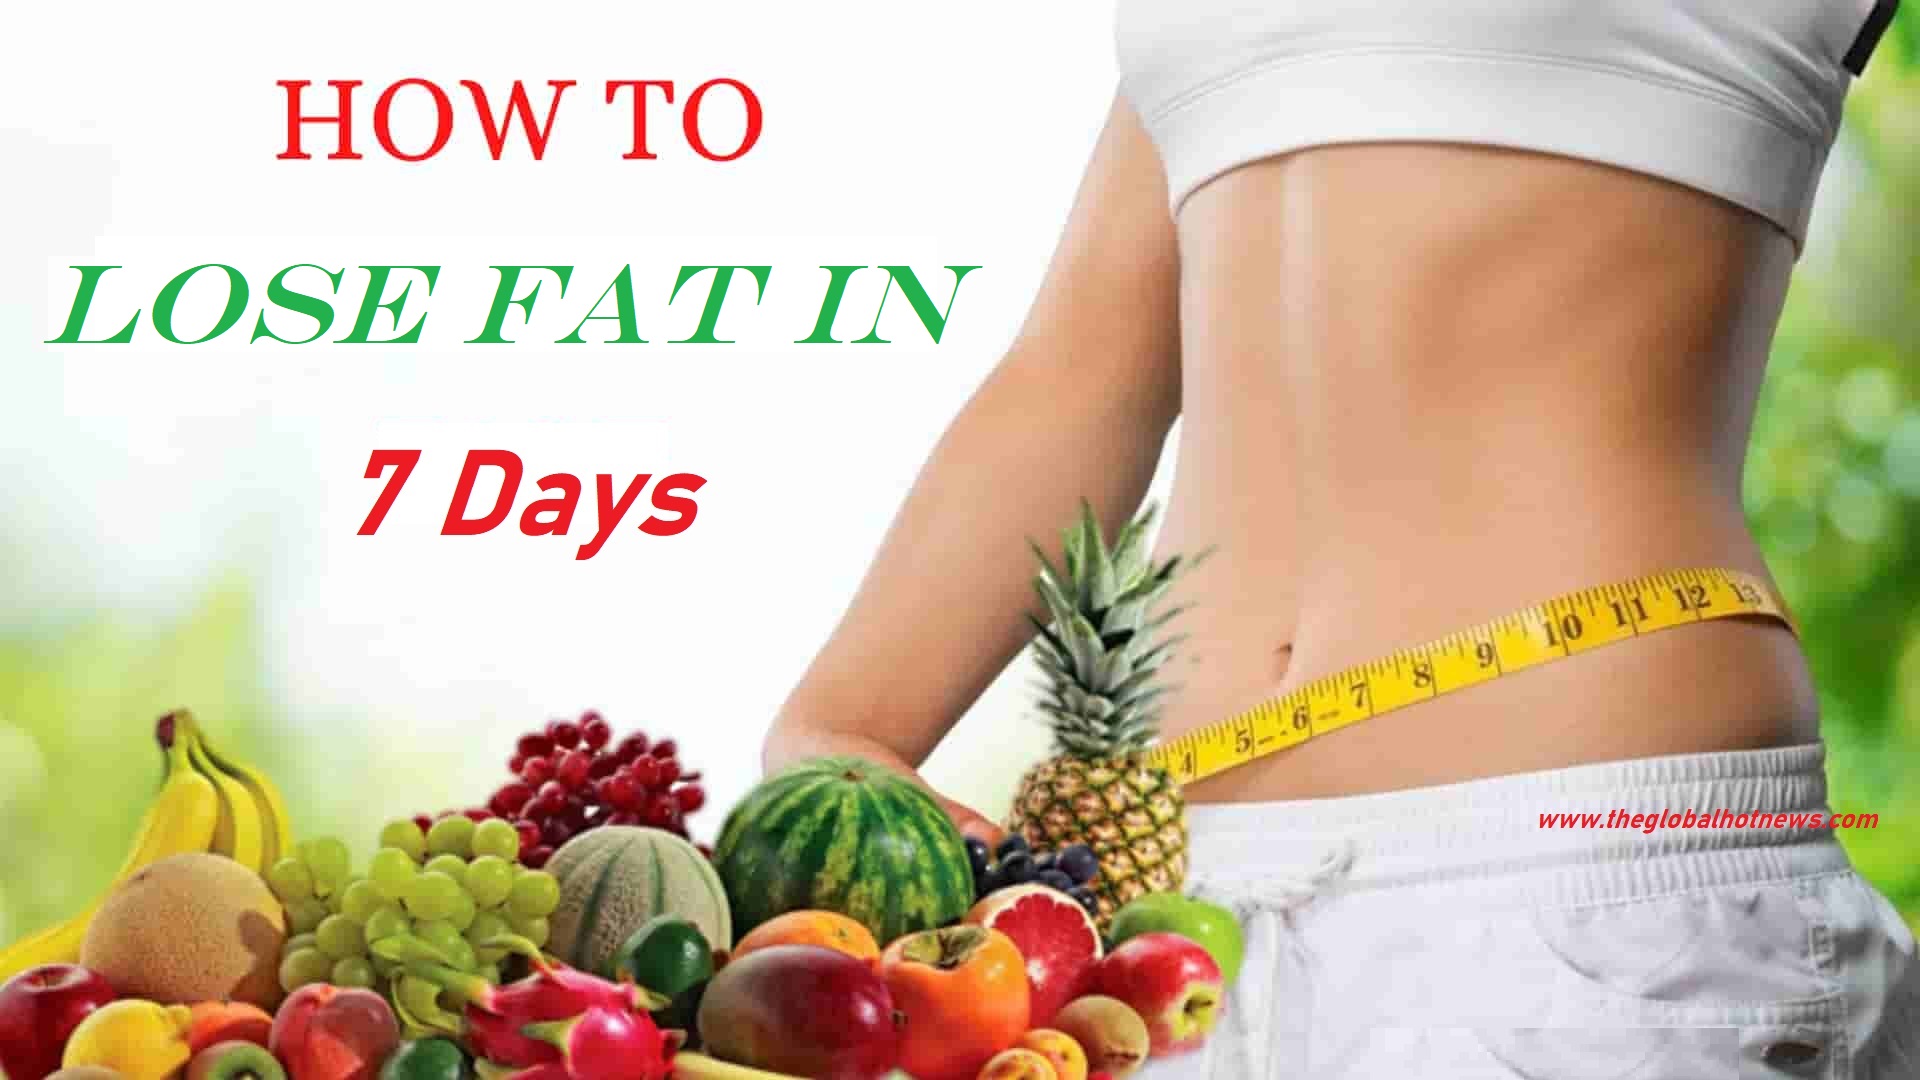 How to lose fat in 7 days